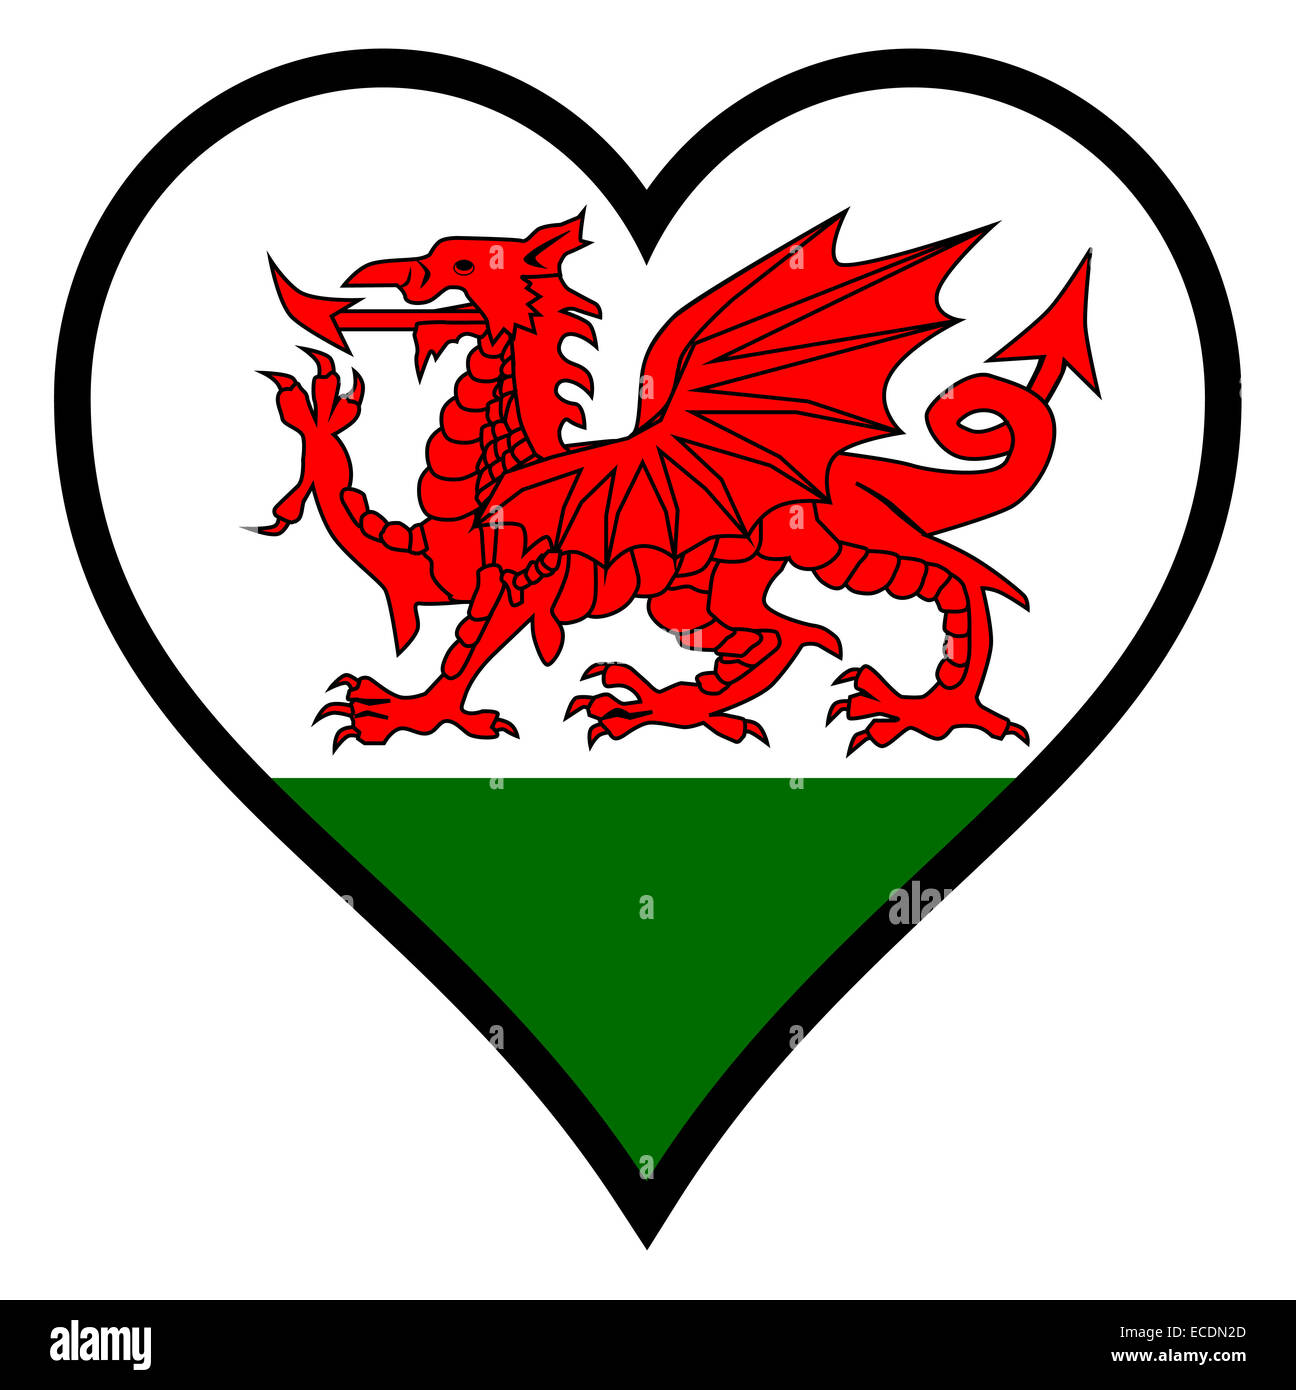 Welsh Dragon Flag within a heart all over a white background Stock Photo